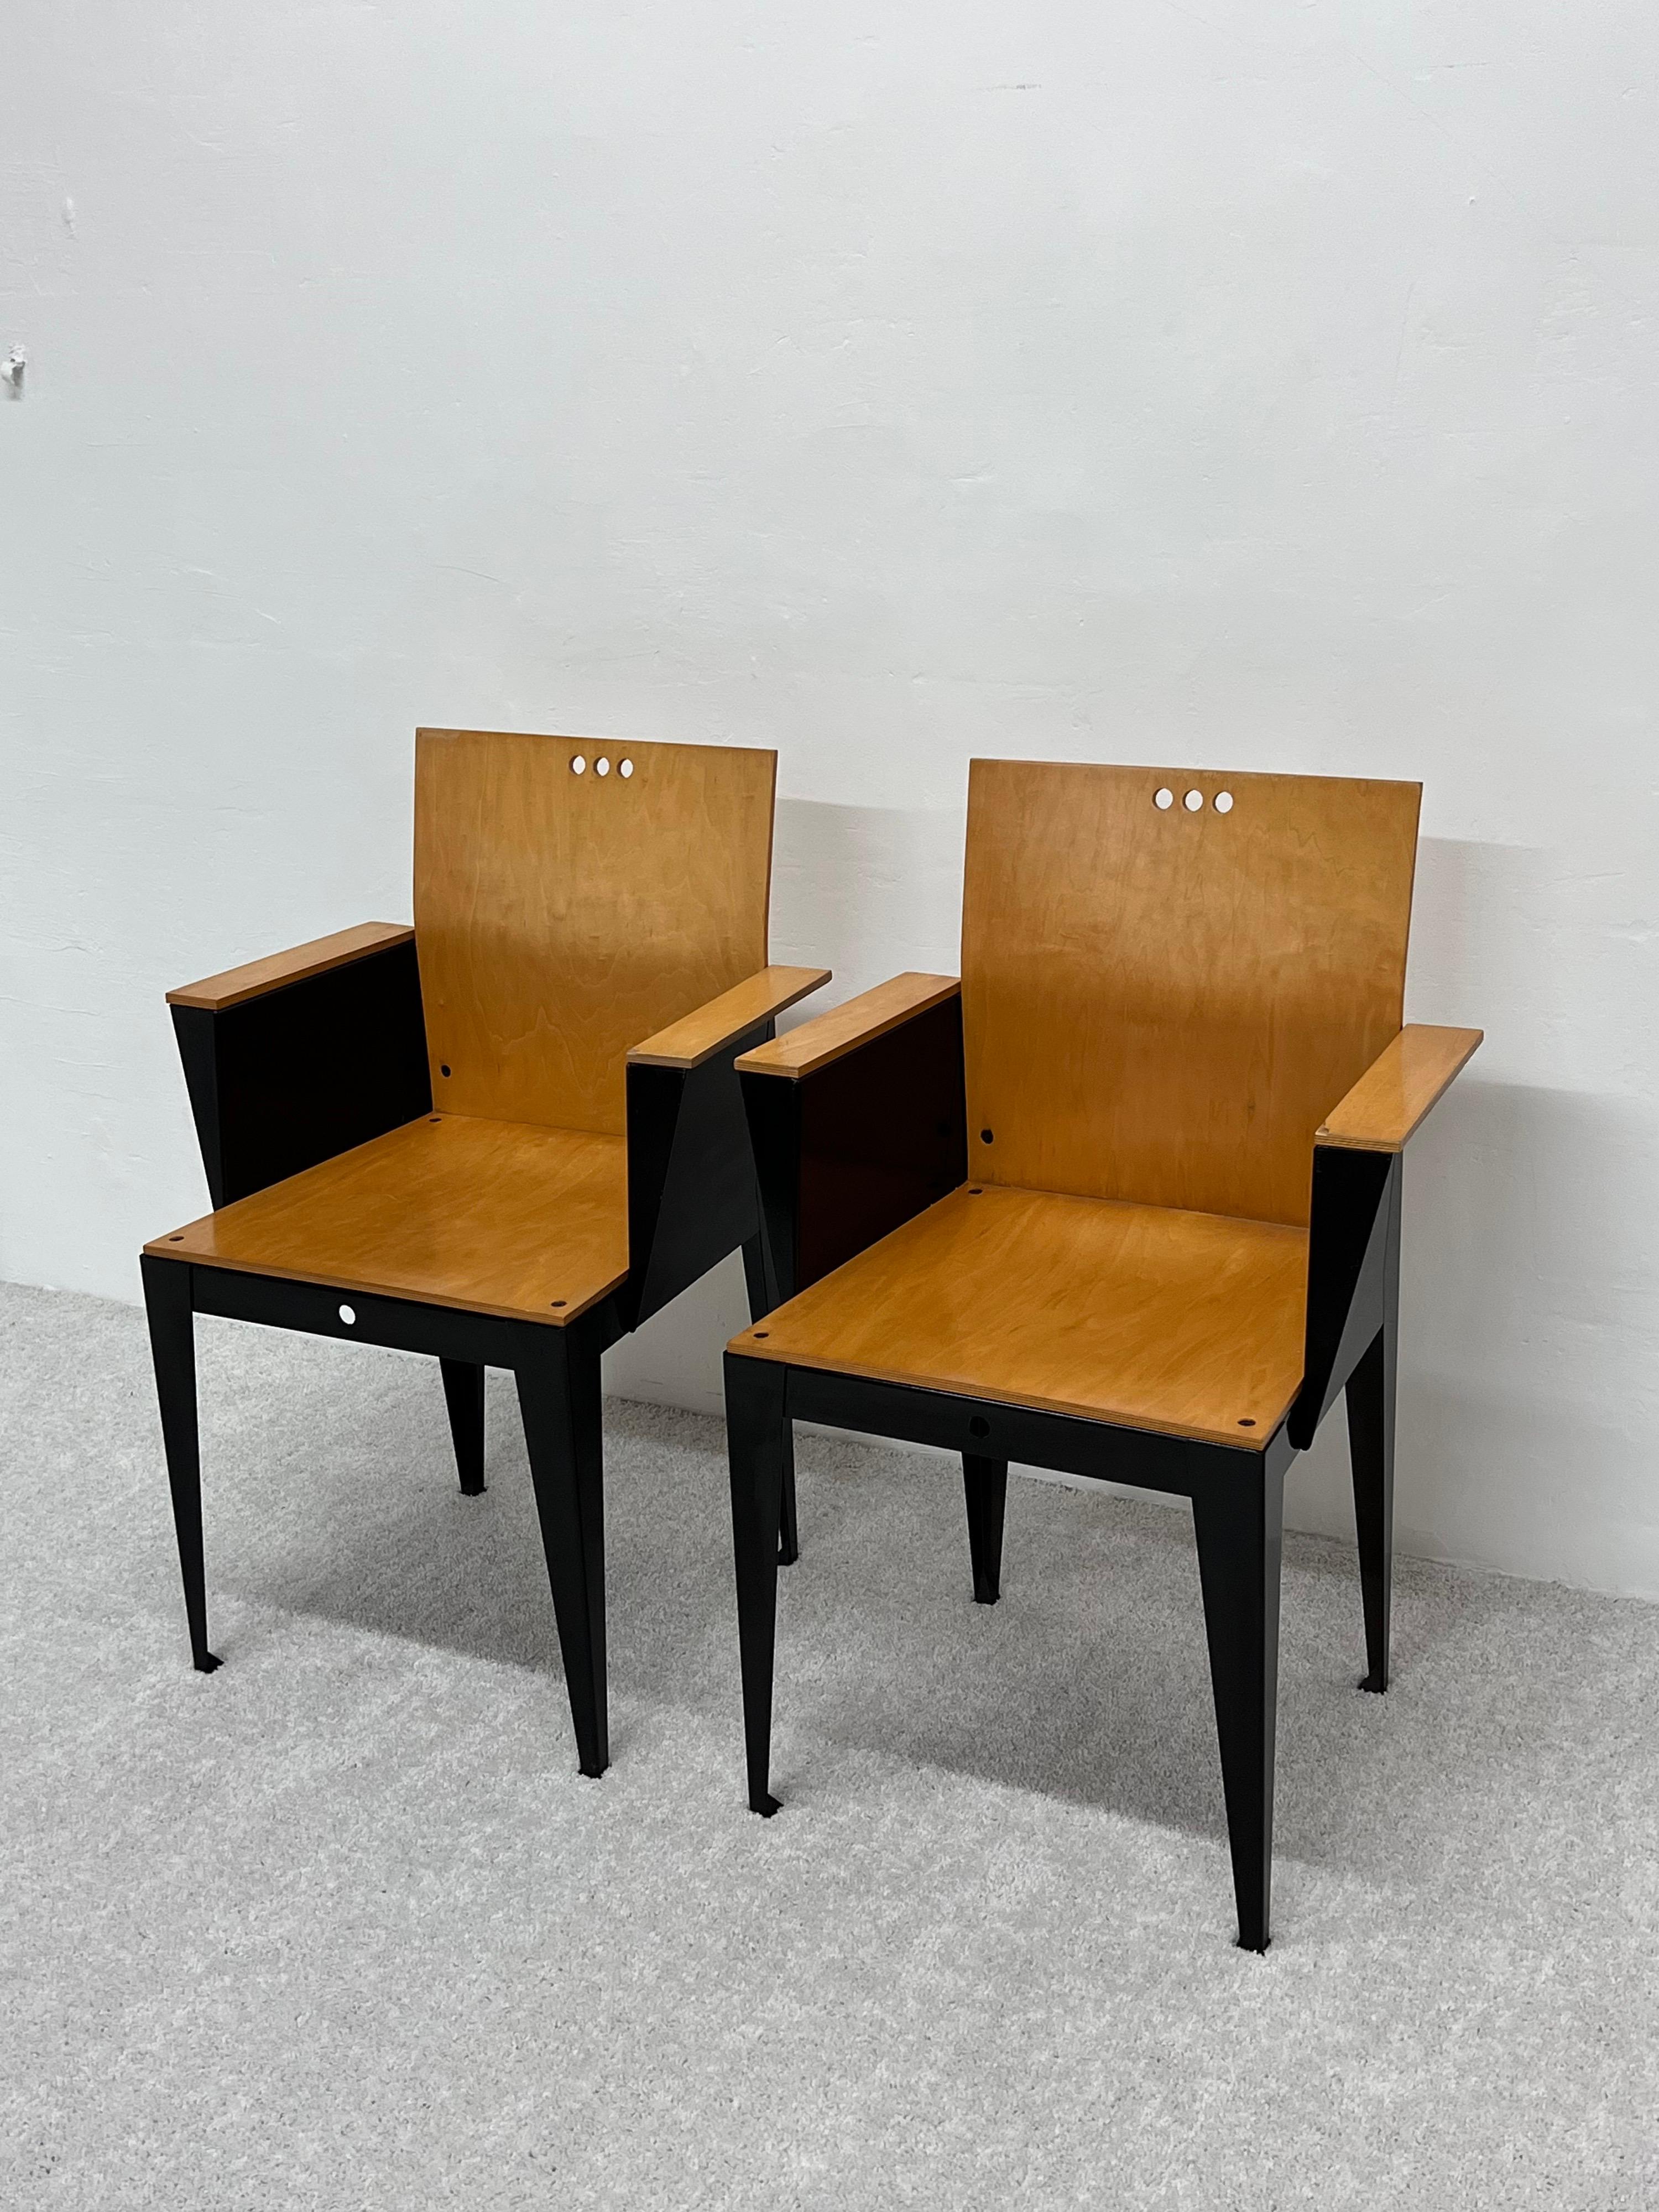 Rare pair of Eli armchairs with maple wood seat, back and arms attached to a black powder coated steel base. Designed by Bruce Sienkowski for Charlotte, 1991.

Measure: arm height: 26-1/4